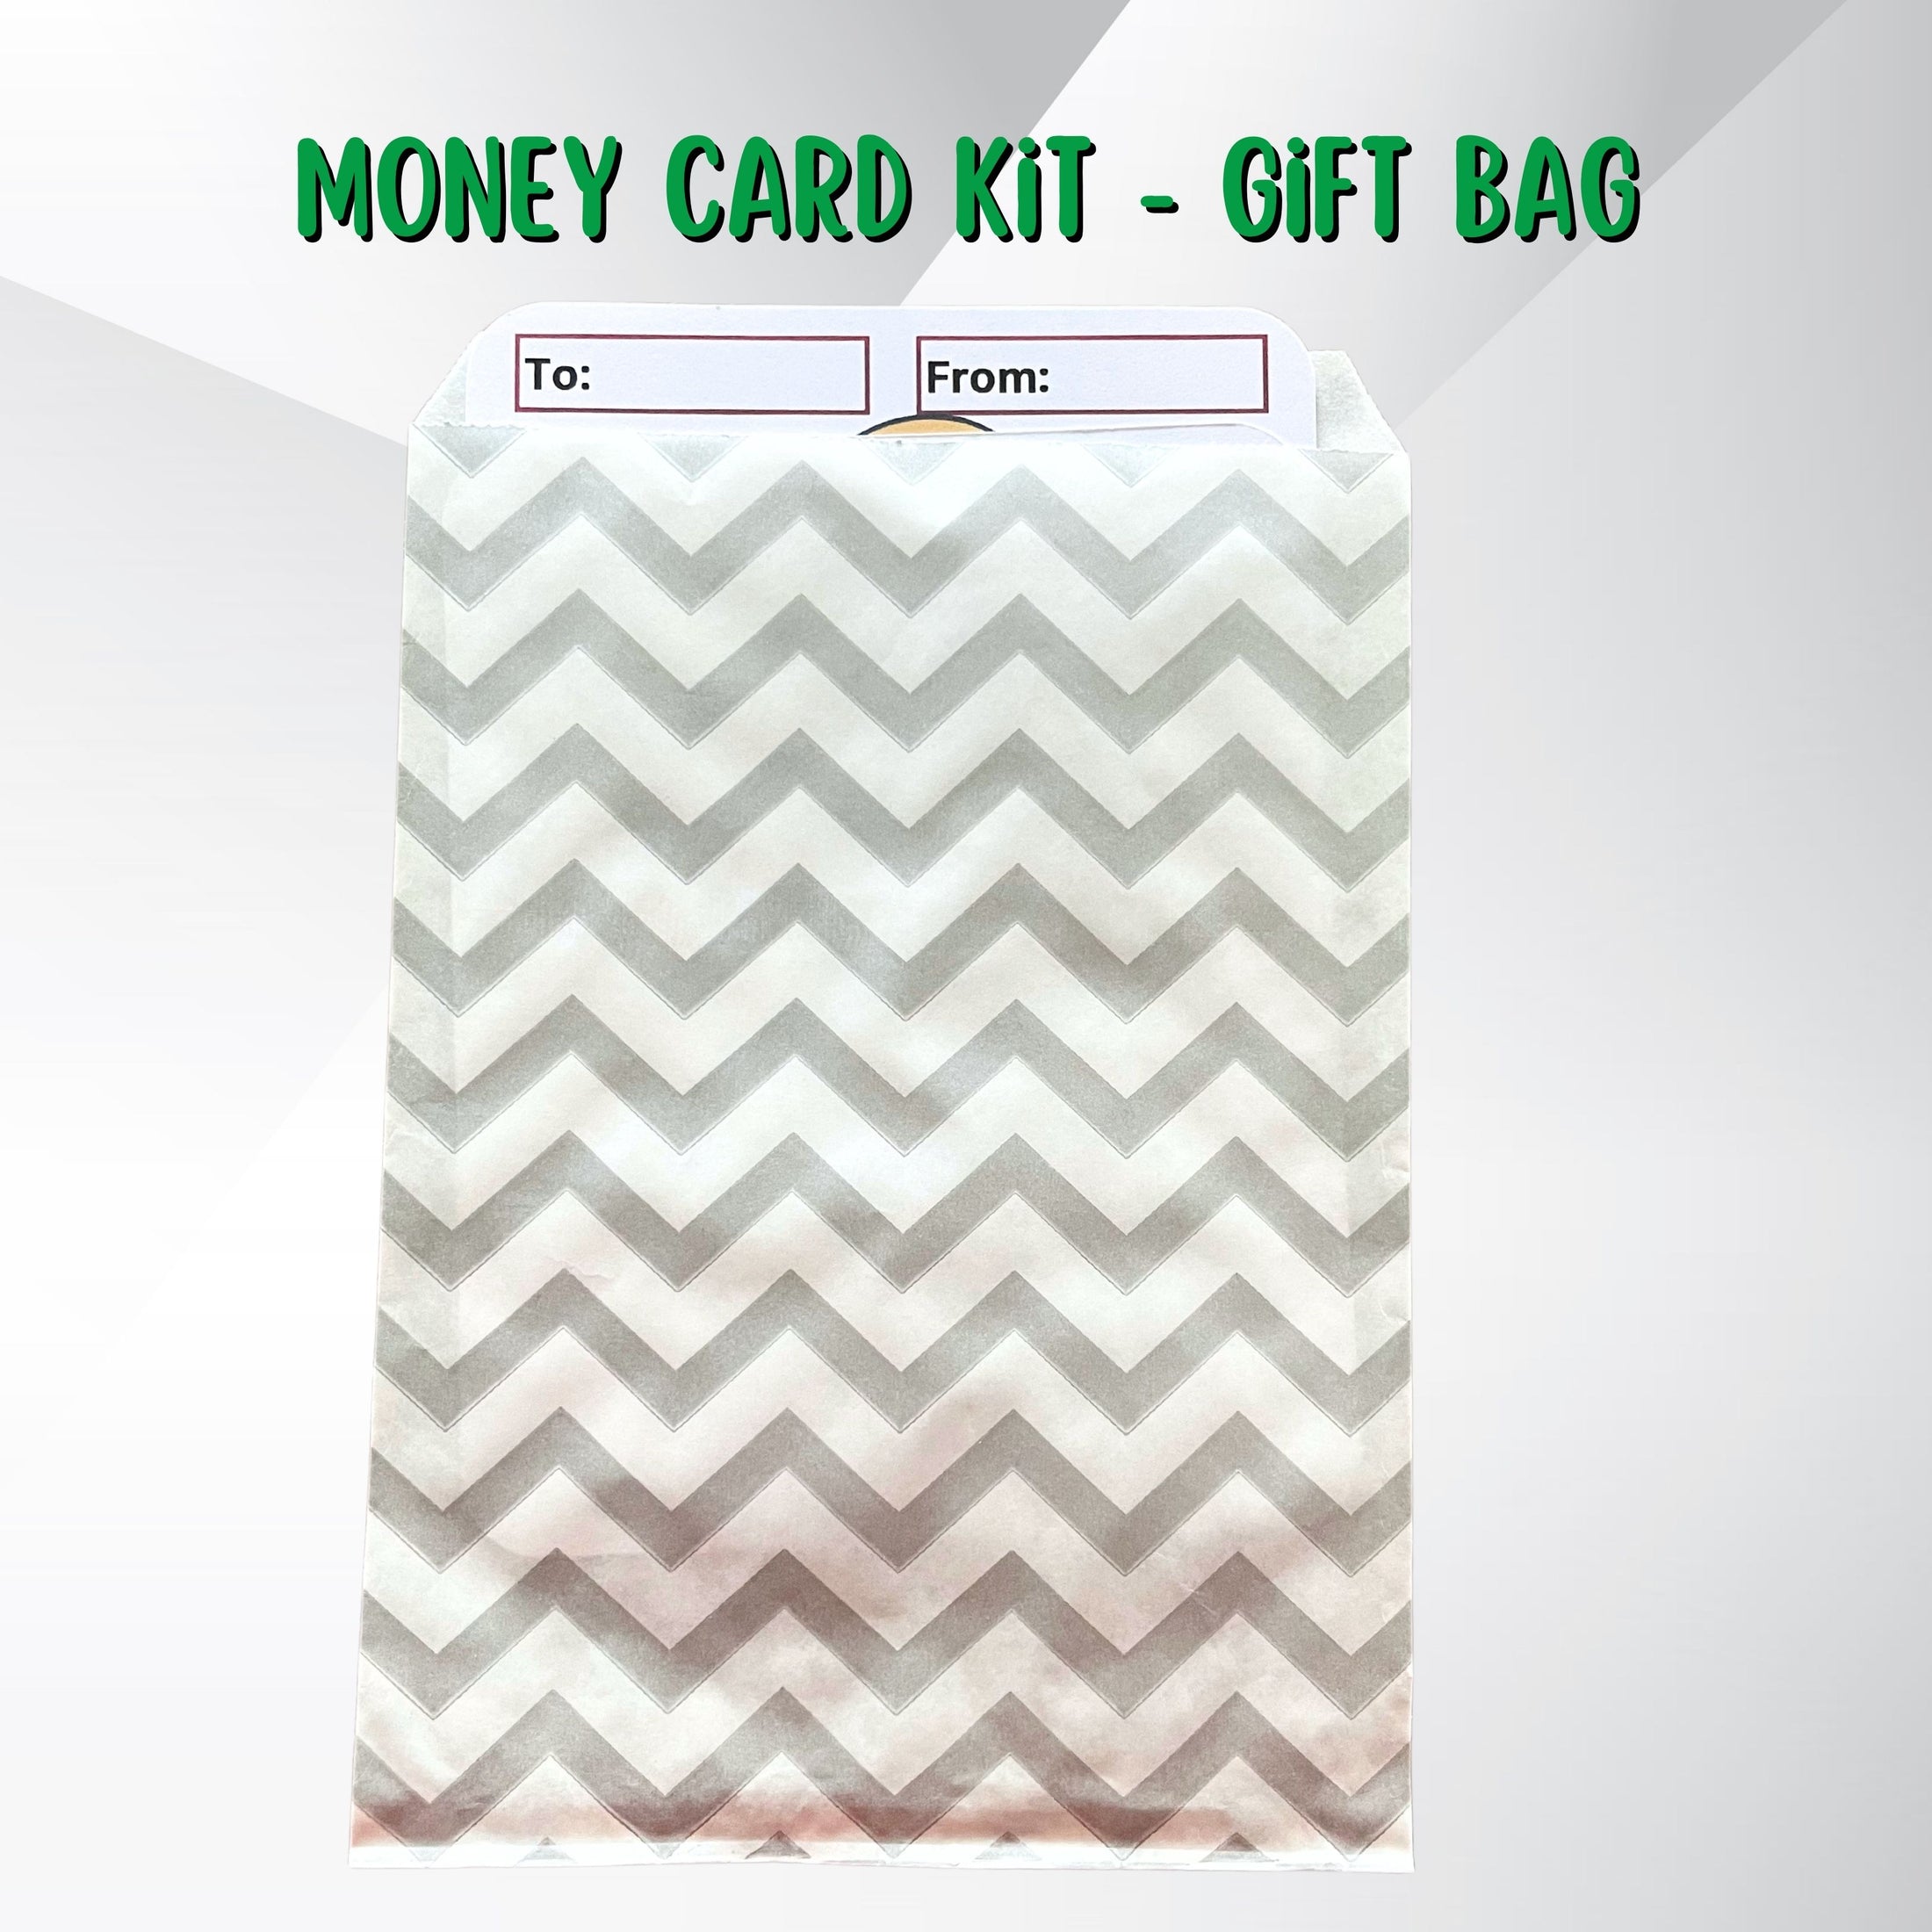 This image show a money card inside the included gift bag.